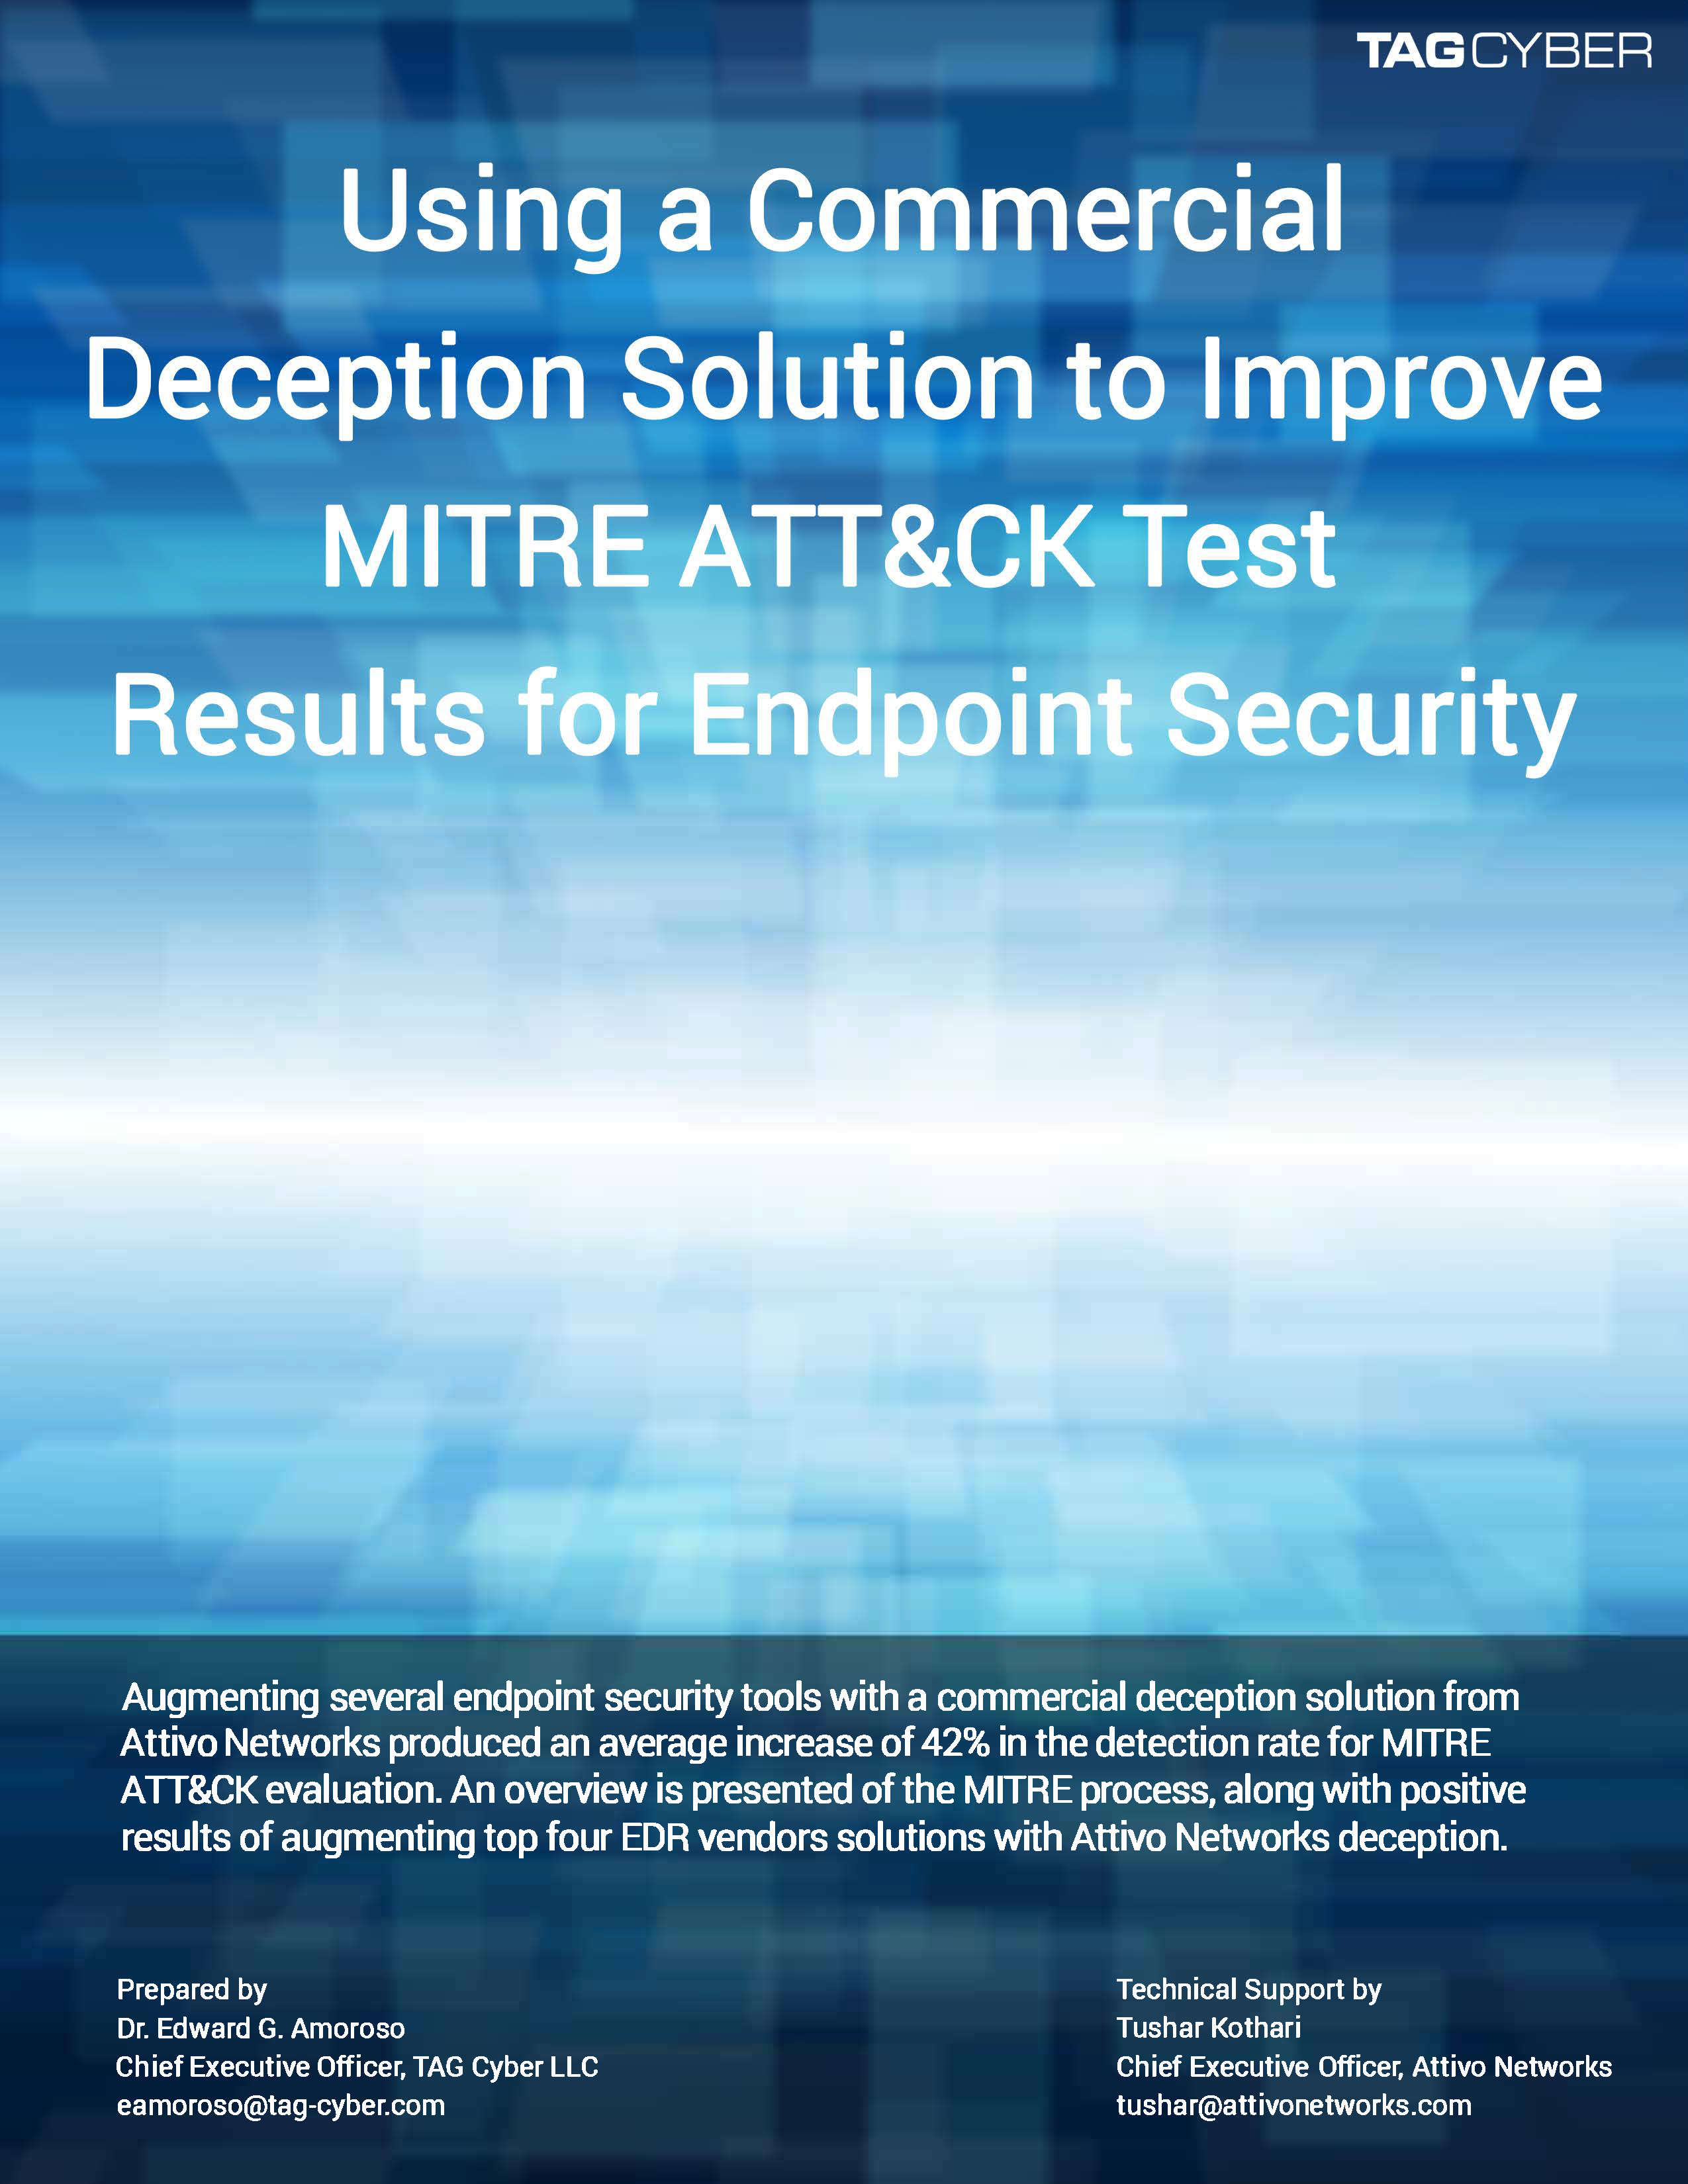 Pages from A Commercial Deception Solution Improves MITRE ATT&CK Results